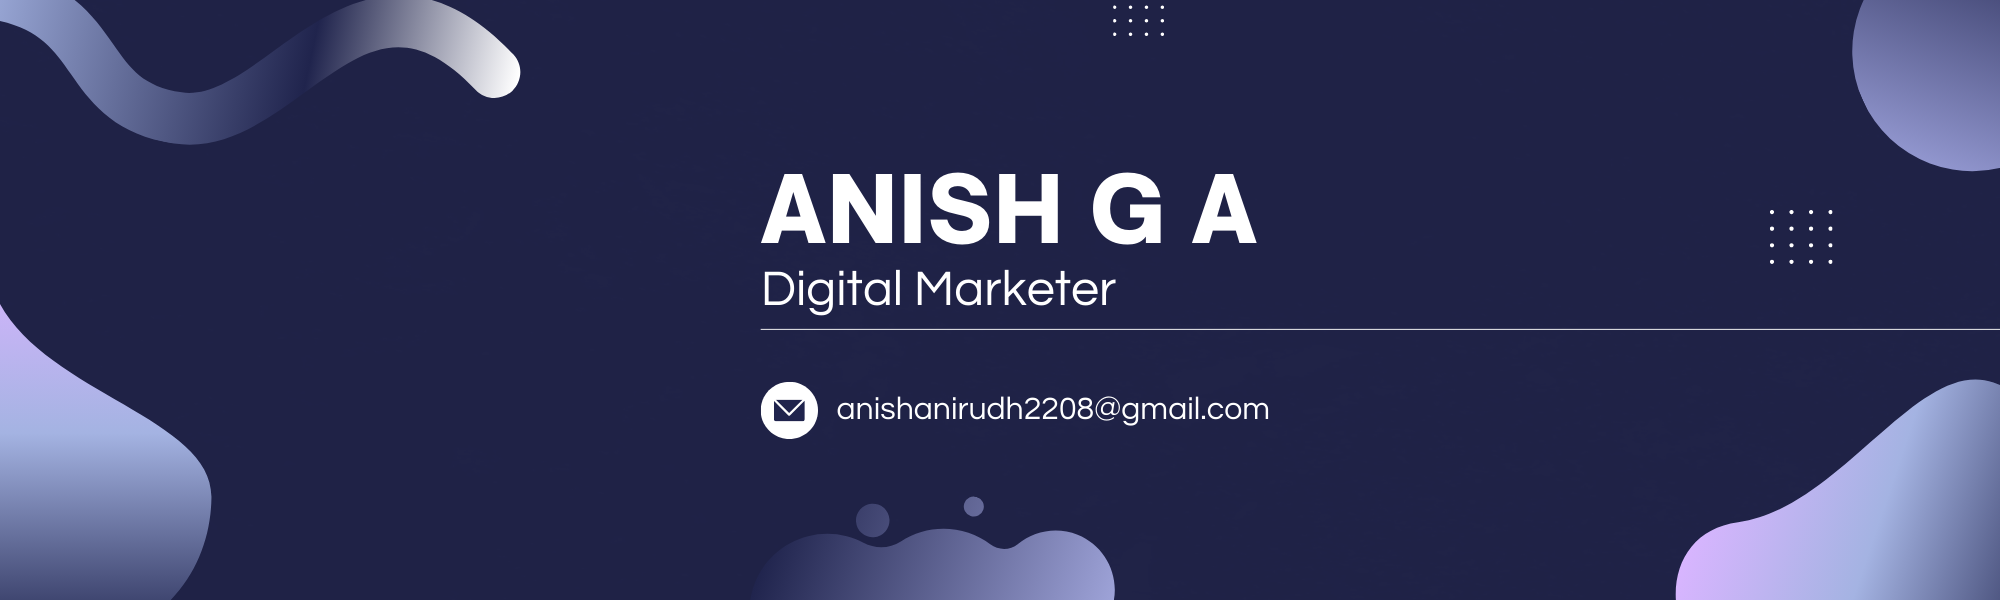 Anish G A's cover image